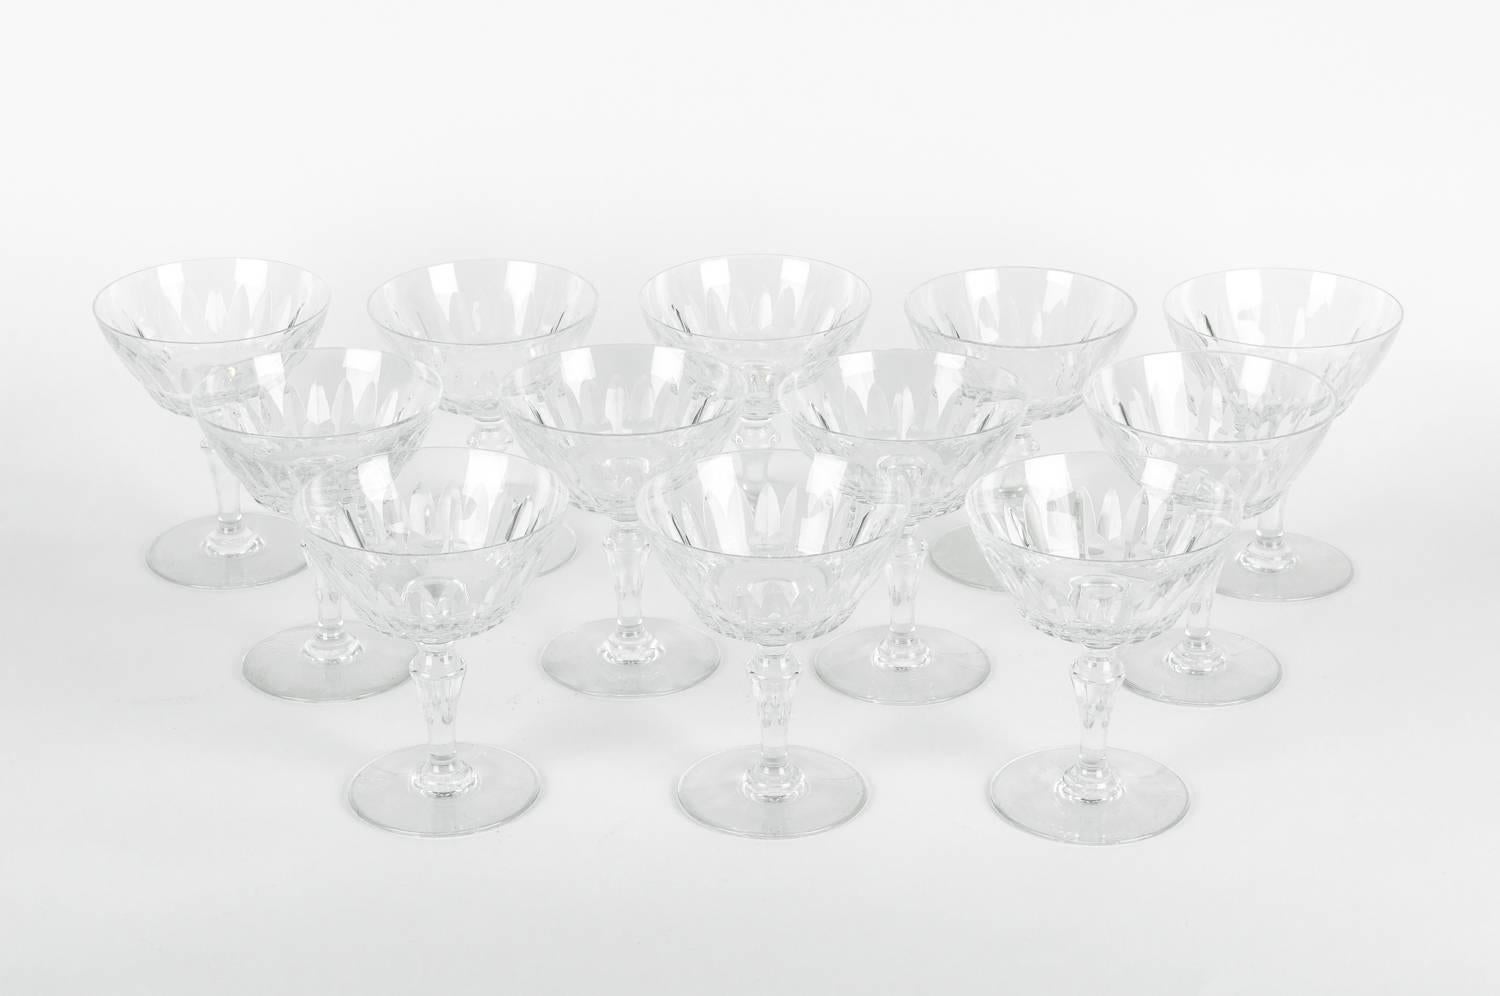 Mid-20th century Baccarat glassware champagne coupe. Each glass is in excellent condition. Each glass coupe measure 5 inches high x 4 inches top diameter. Maker's mark undersigned.